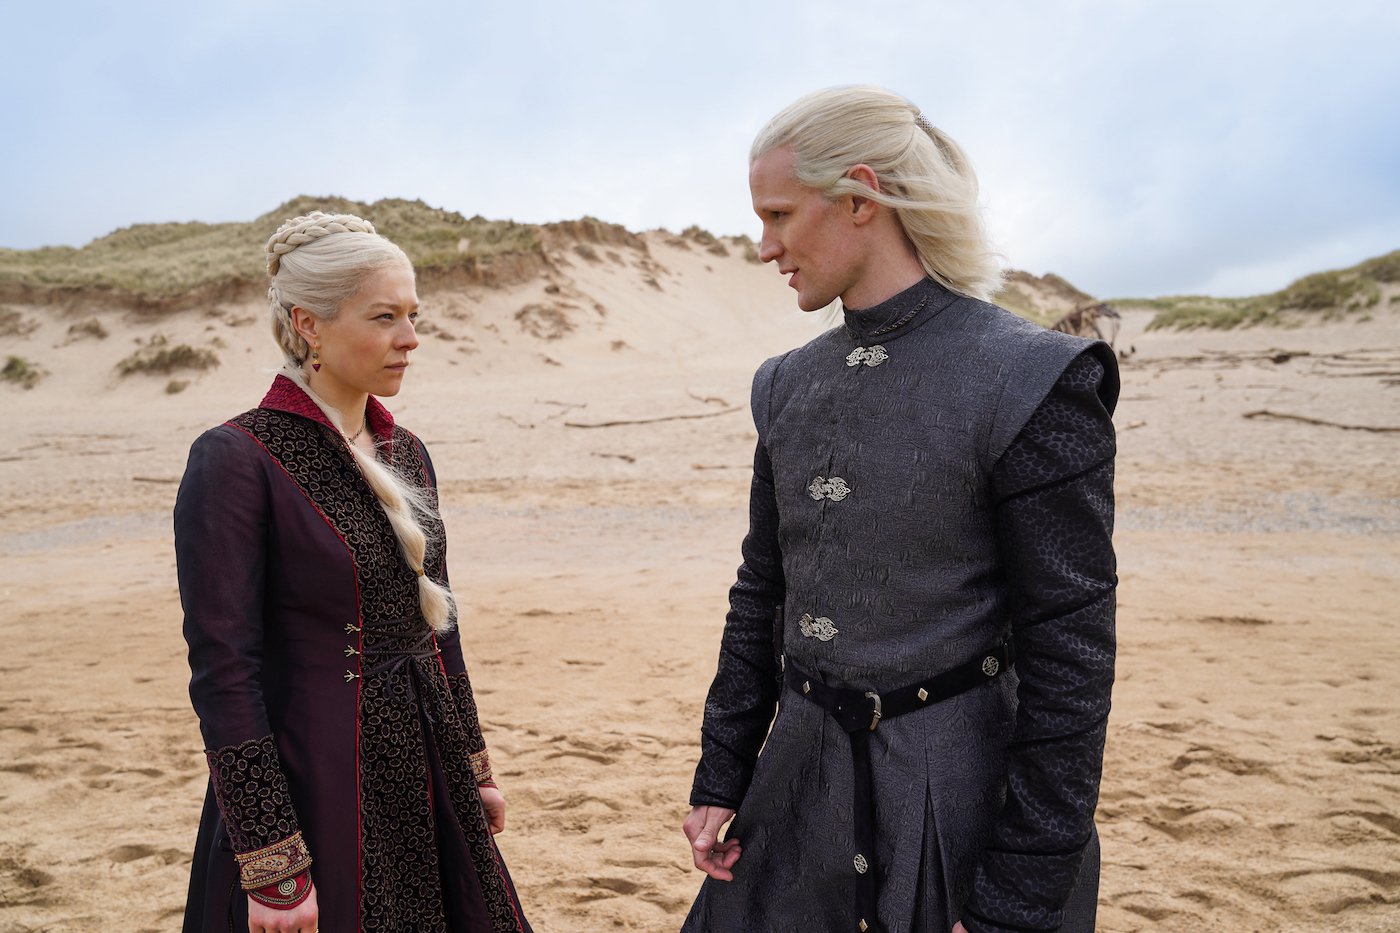 House of the Dragon stars Emma D’Arcy as Princess Rhaenyra Targaryen and Matt Smith as Prince Daemon Targaryen in a production still from the upcoming season of the Game of Thrones prequel